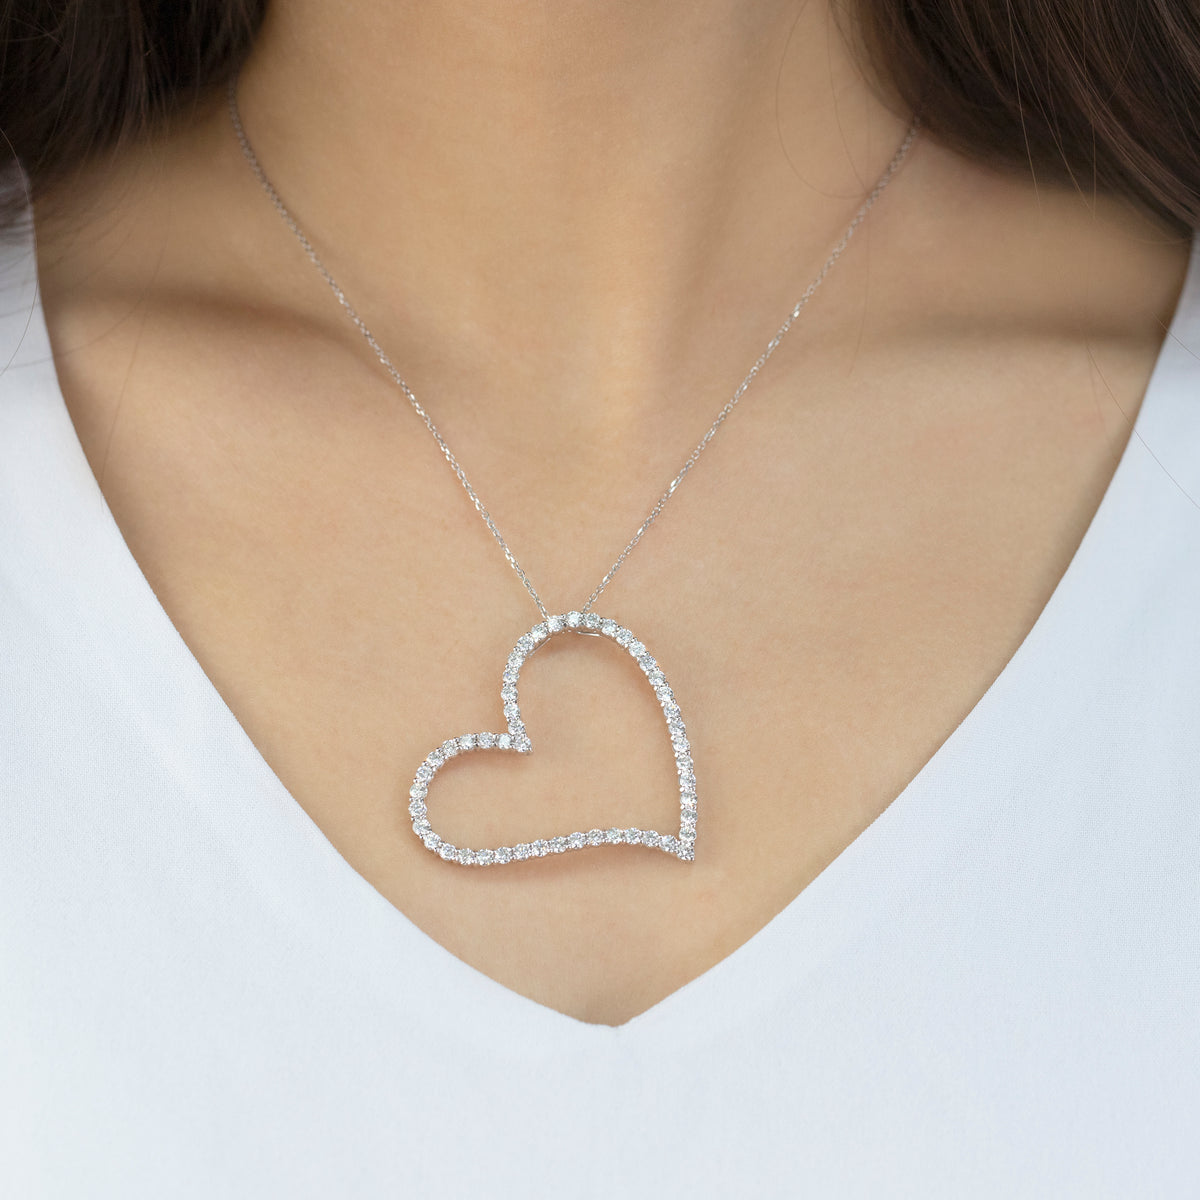 Slightly Curved Ireal Heart Necklace